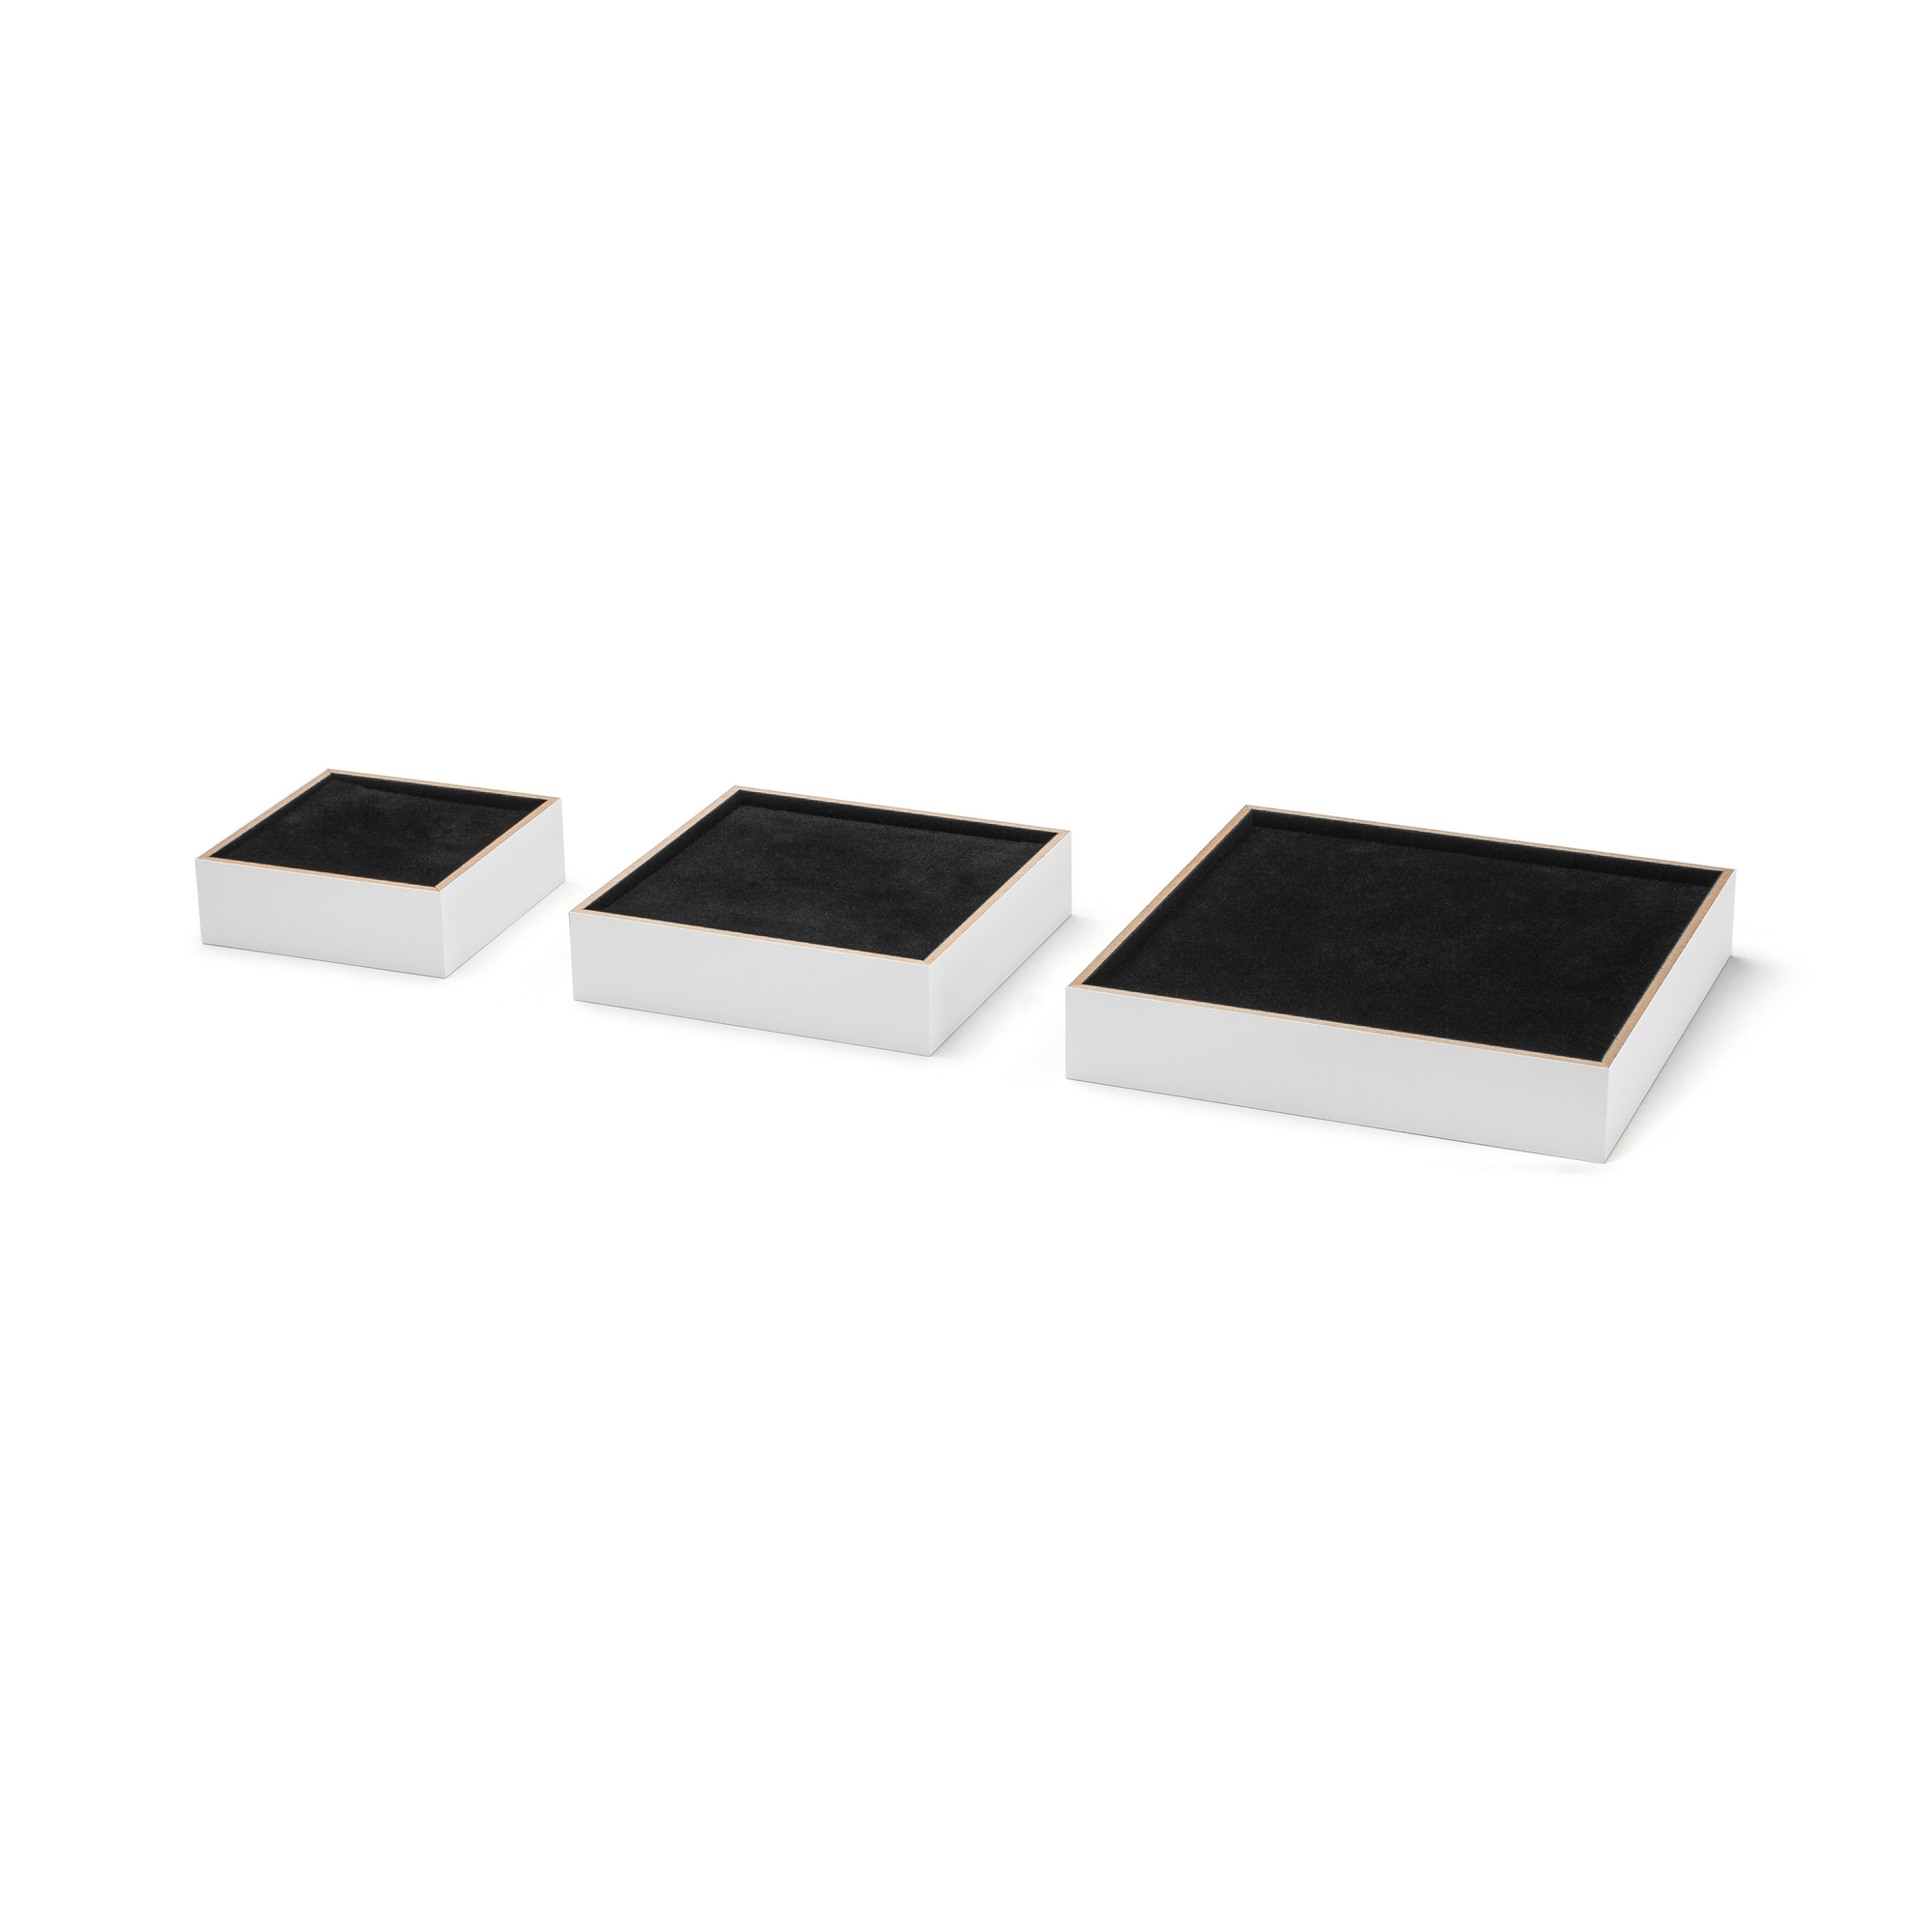 WhiteCube Display, 3-piece set of MDF-cubes with foam inlay each